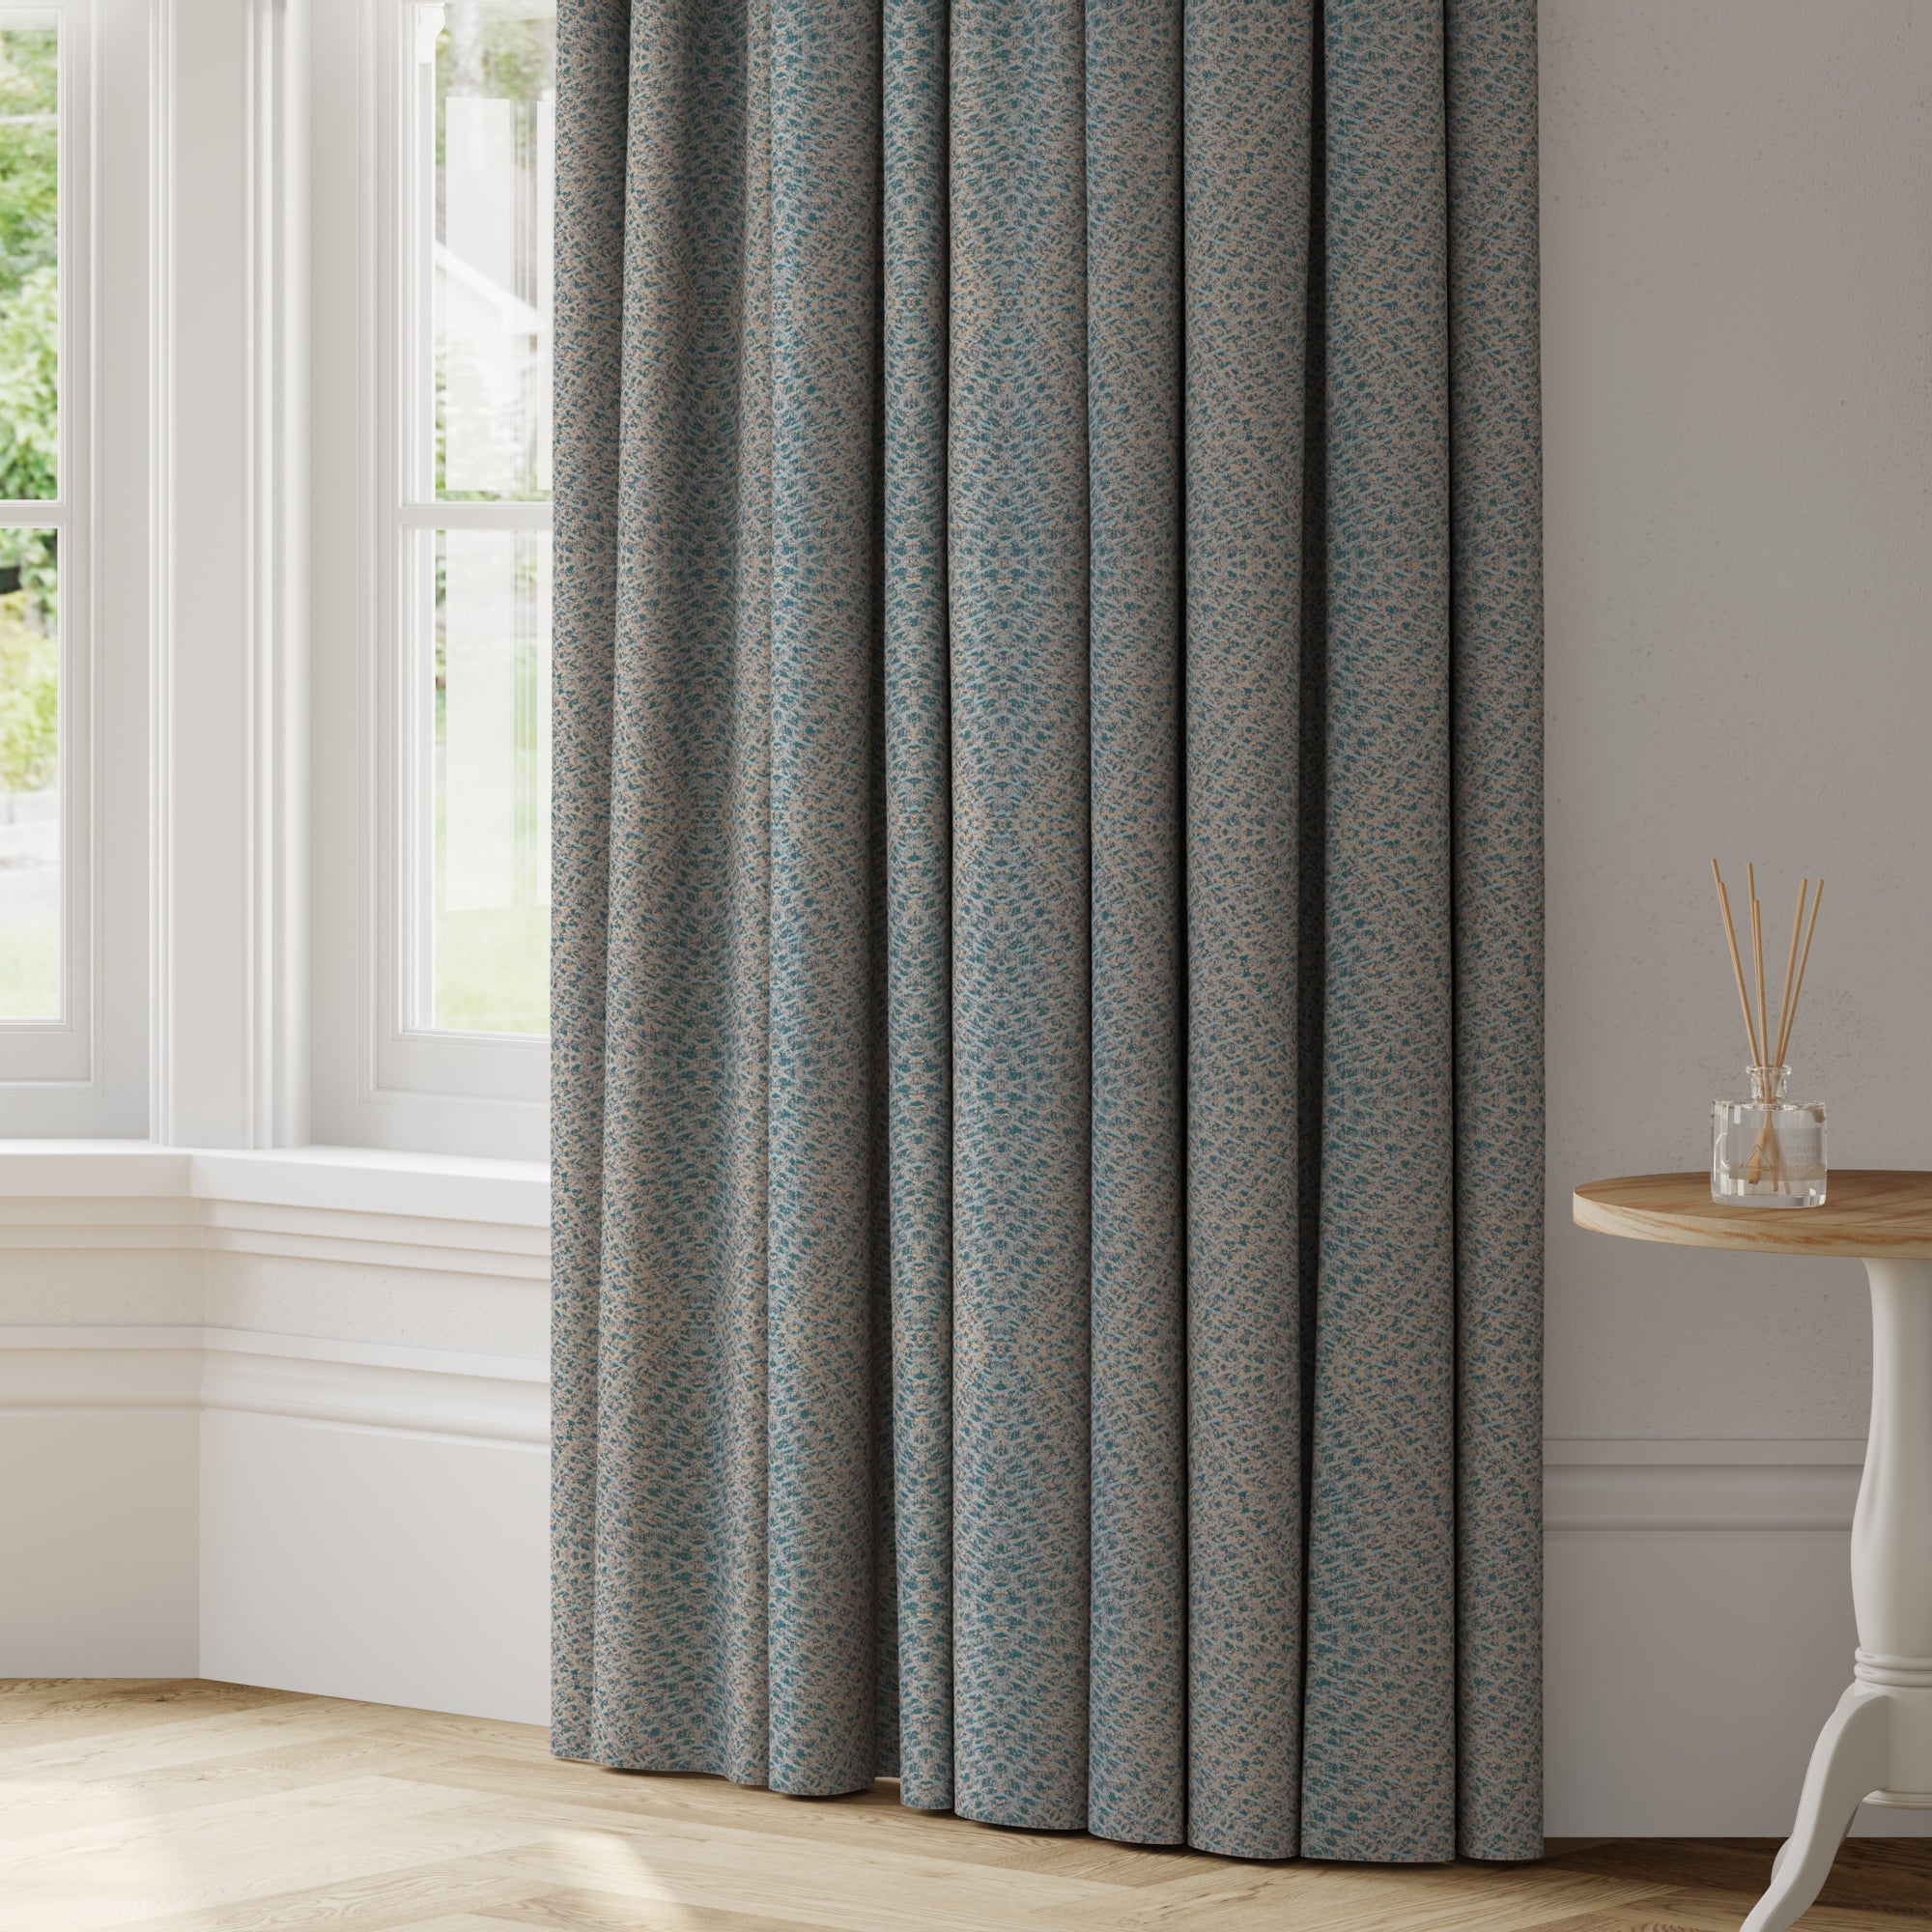 Canberra Made to Measure Curtains Canberra Teal